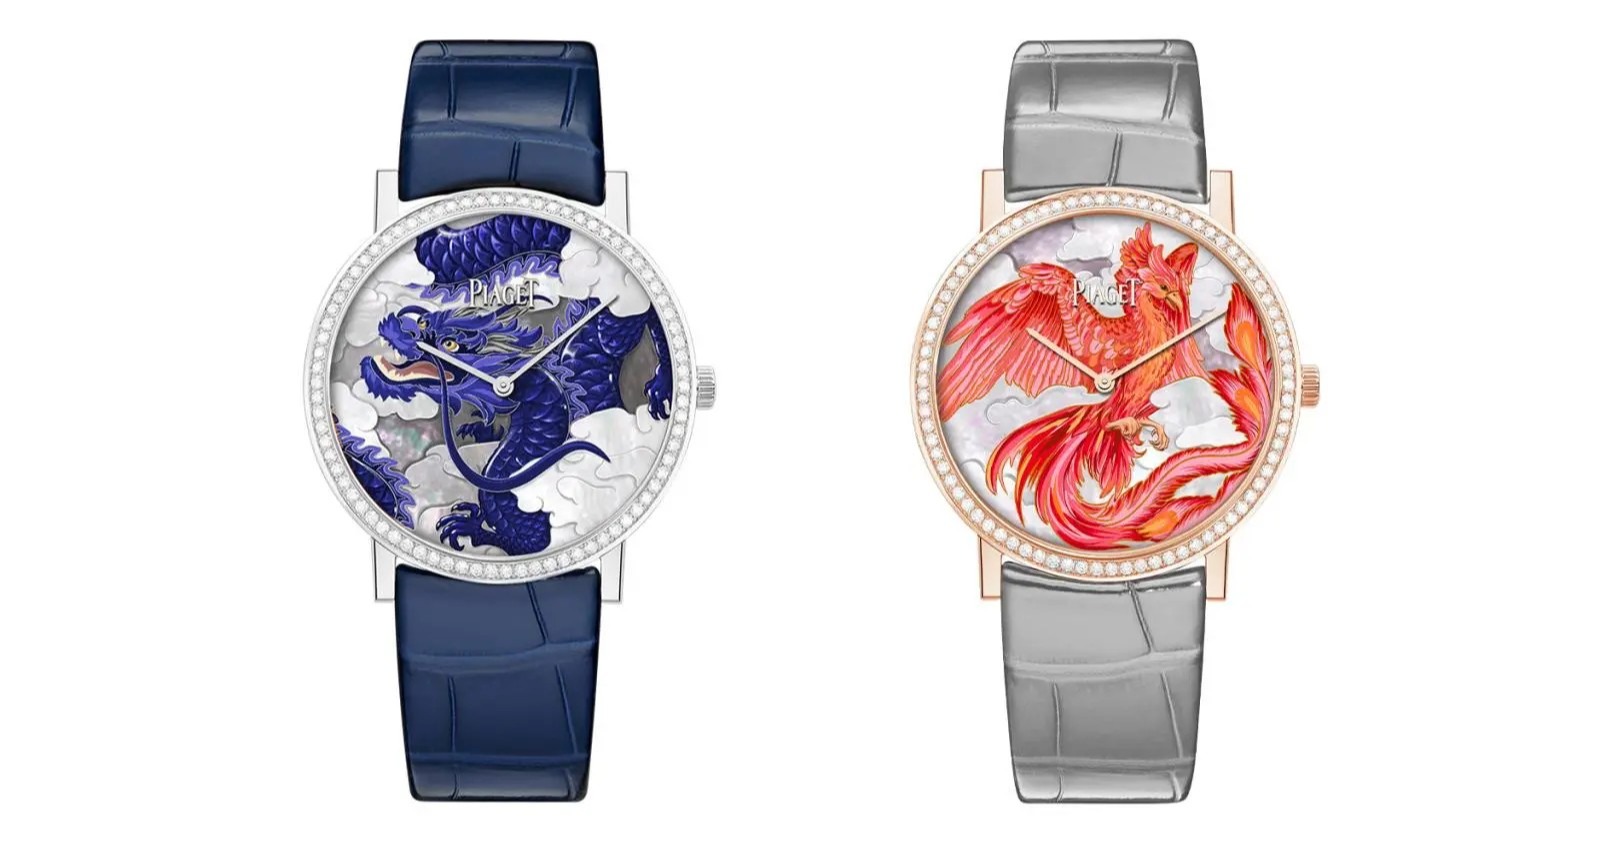 Piaget Year of the Dragon capsule collection. (Sumber foto: Piaget)